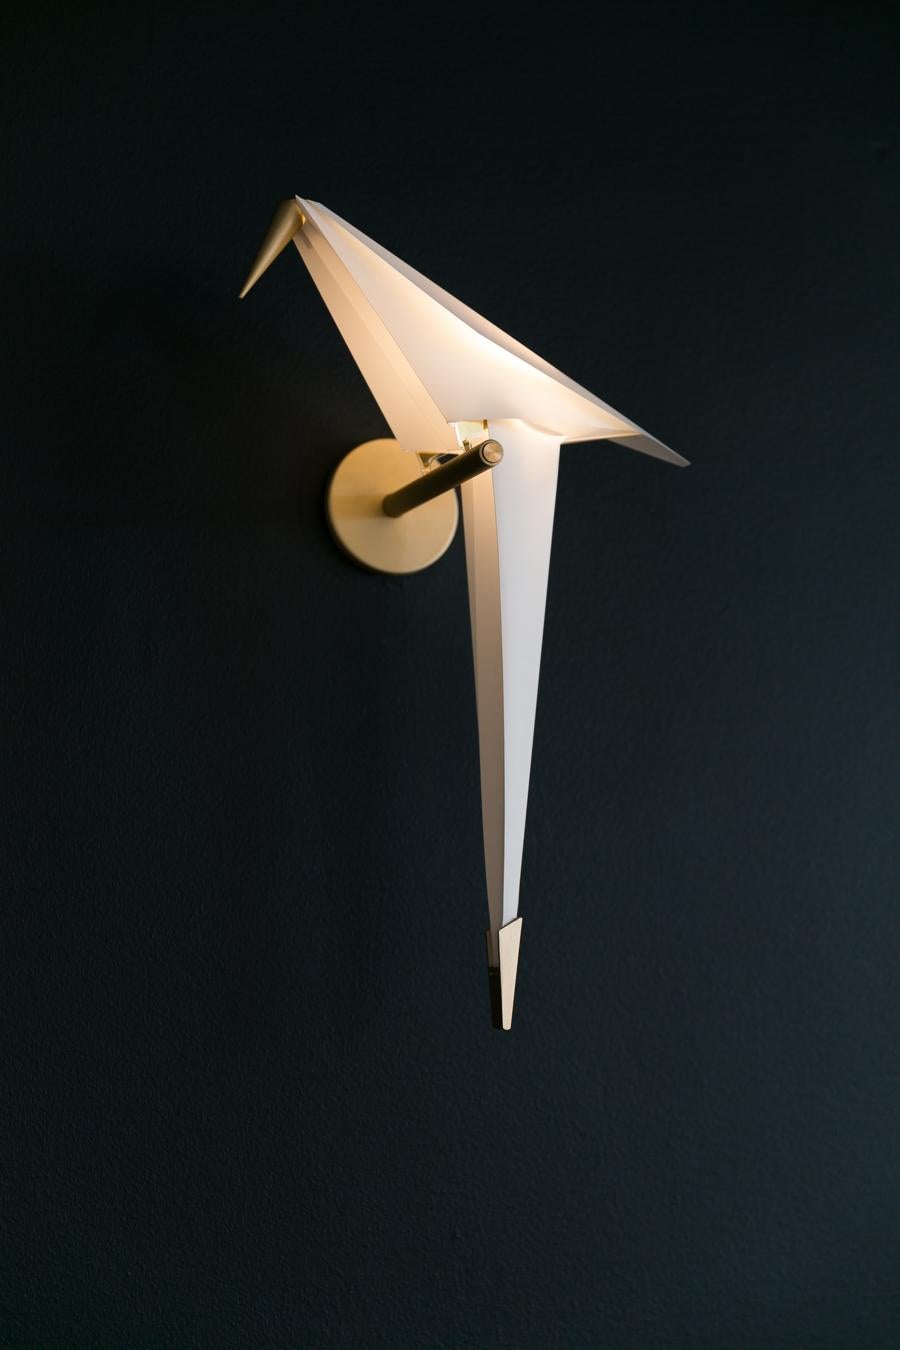 Made of folded paper and brass, the Perch evokes a feeling of freedom. Let the graceful bird swing and glow with joy. Just beware that it might just spread its wings and fly away… This sunlit bird is free to swing when softly touched. It gently